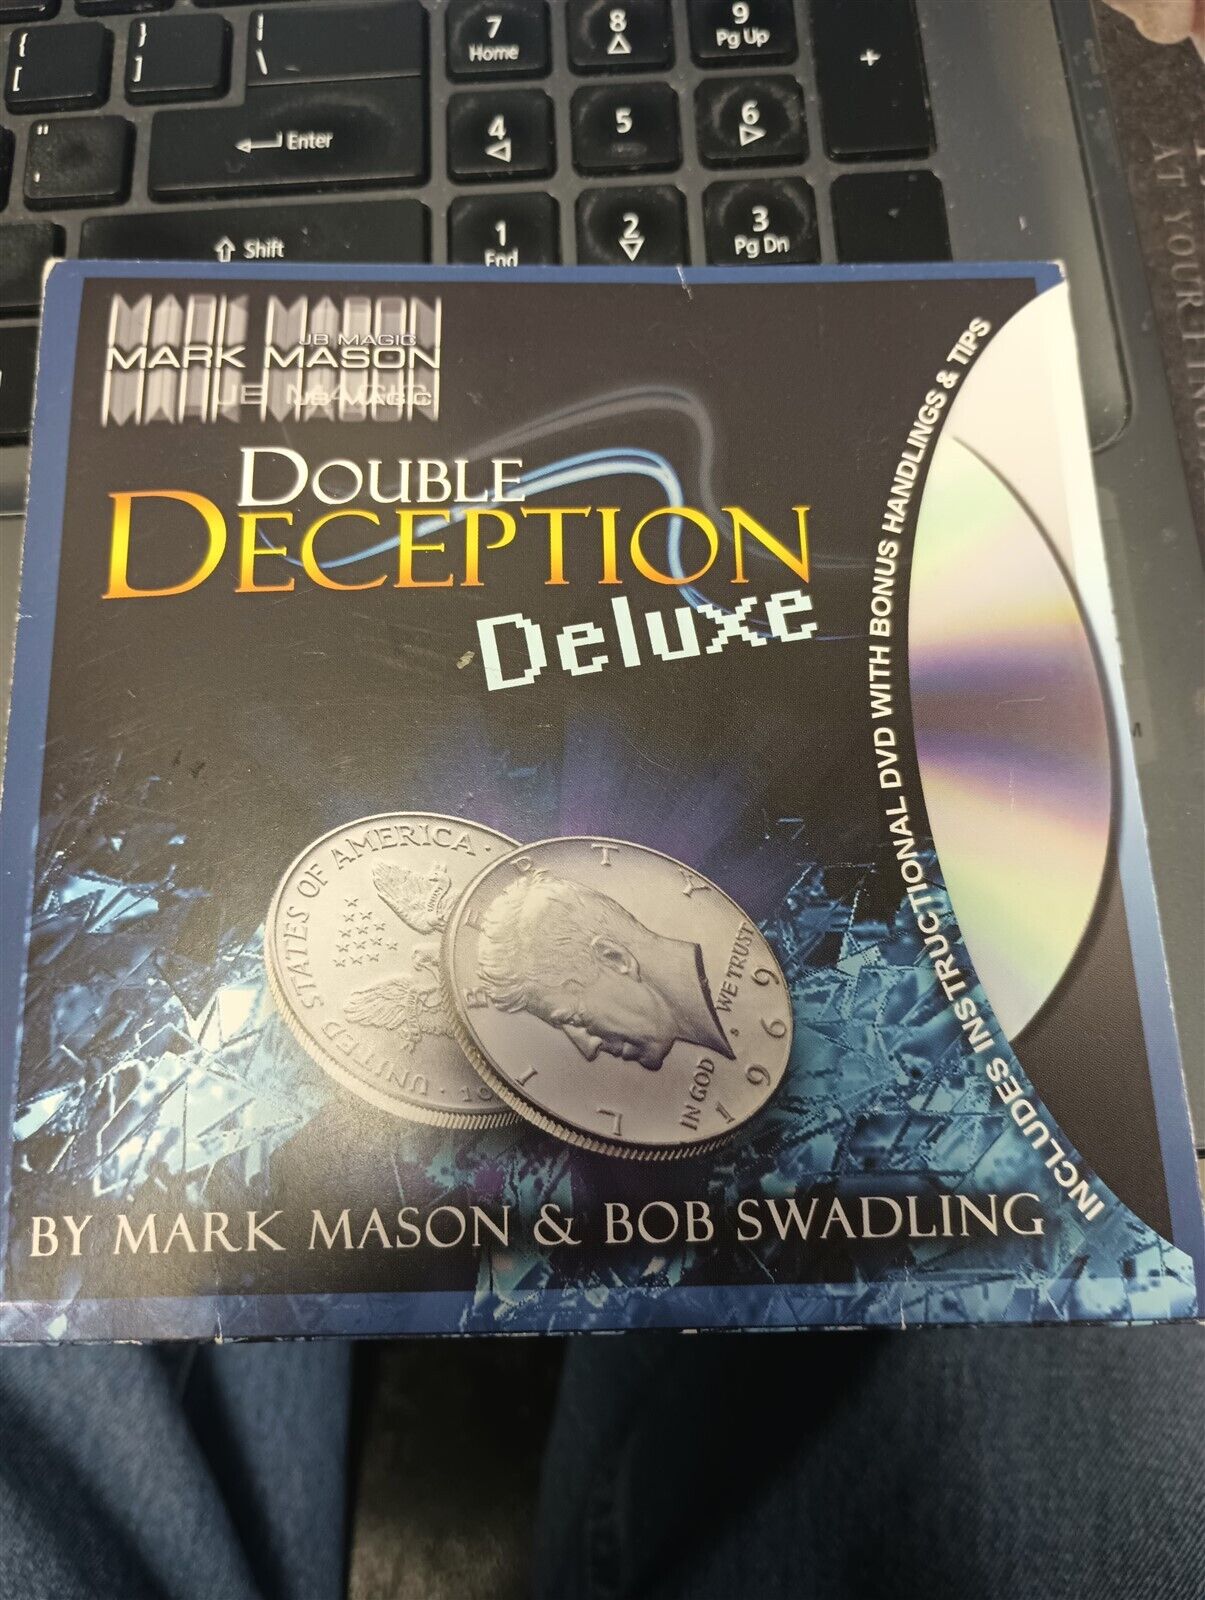 Double Deception Deluxe by Mark Mason and Bob Swadling (US Quarter)